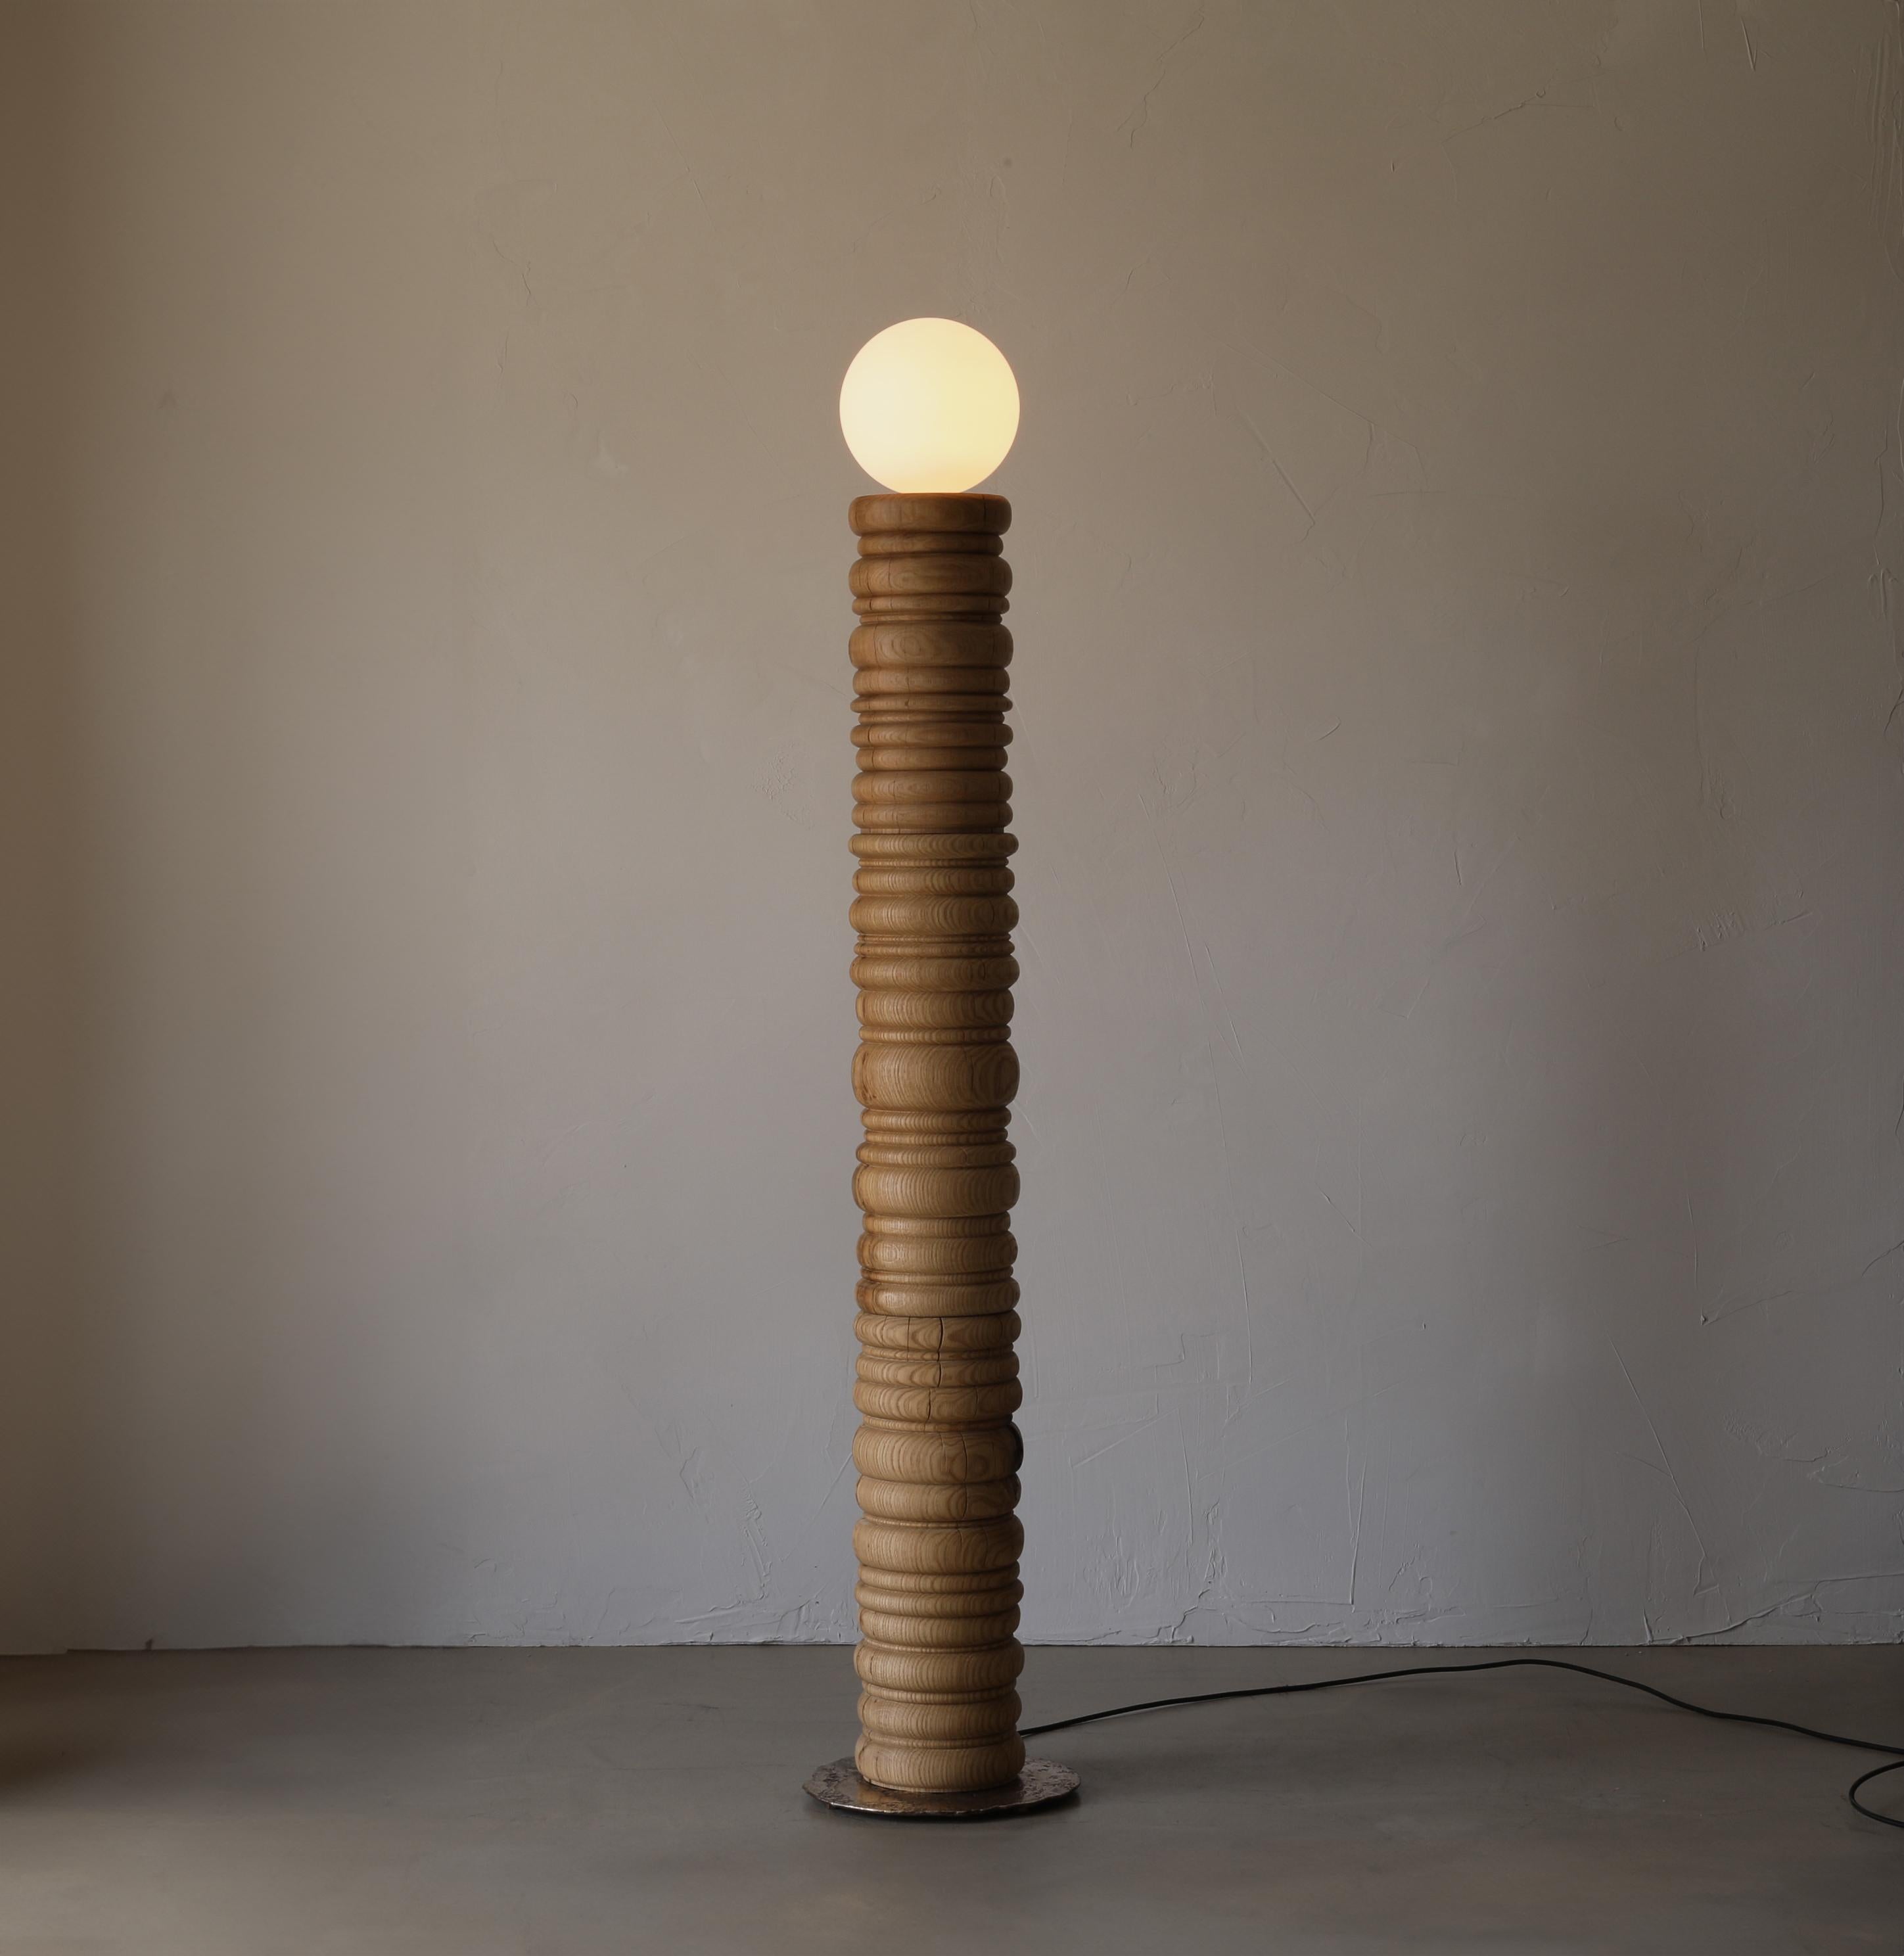 The Bead Lamp II is a solid oak standing lamp with a large frosted globe bulb. The lamp sits on a poured bronze plate and is switched on the cord with a dimmer.

BEAD - This collection is a blend of refinement and irregularity. The bases are